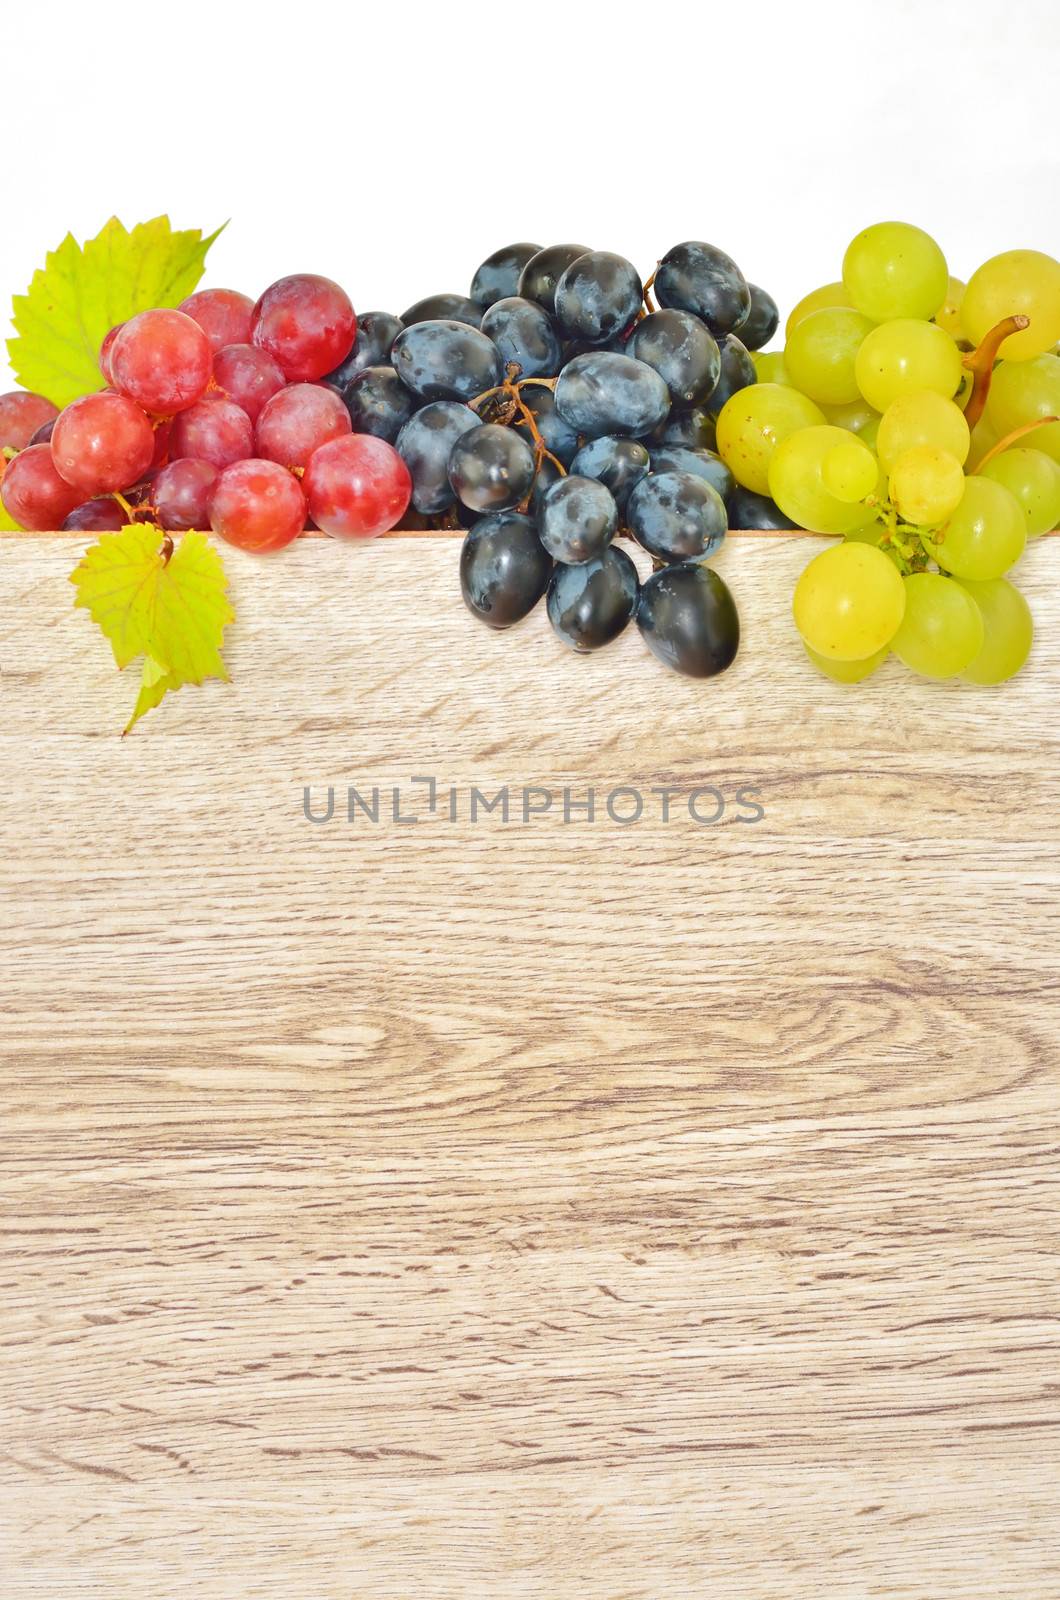 types of grapes on wood by mady70